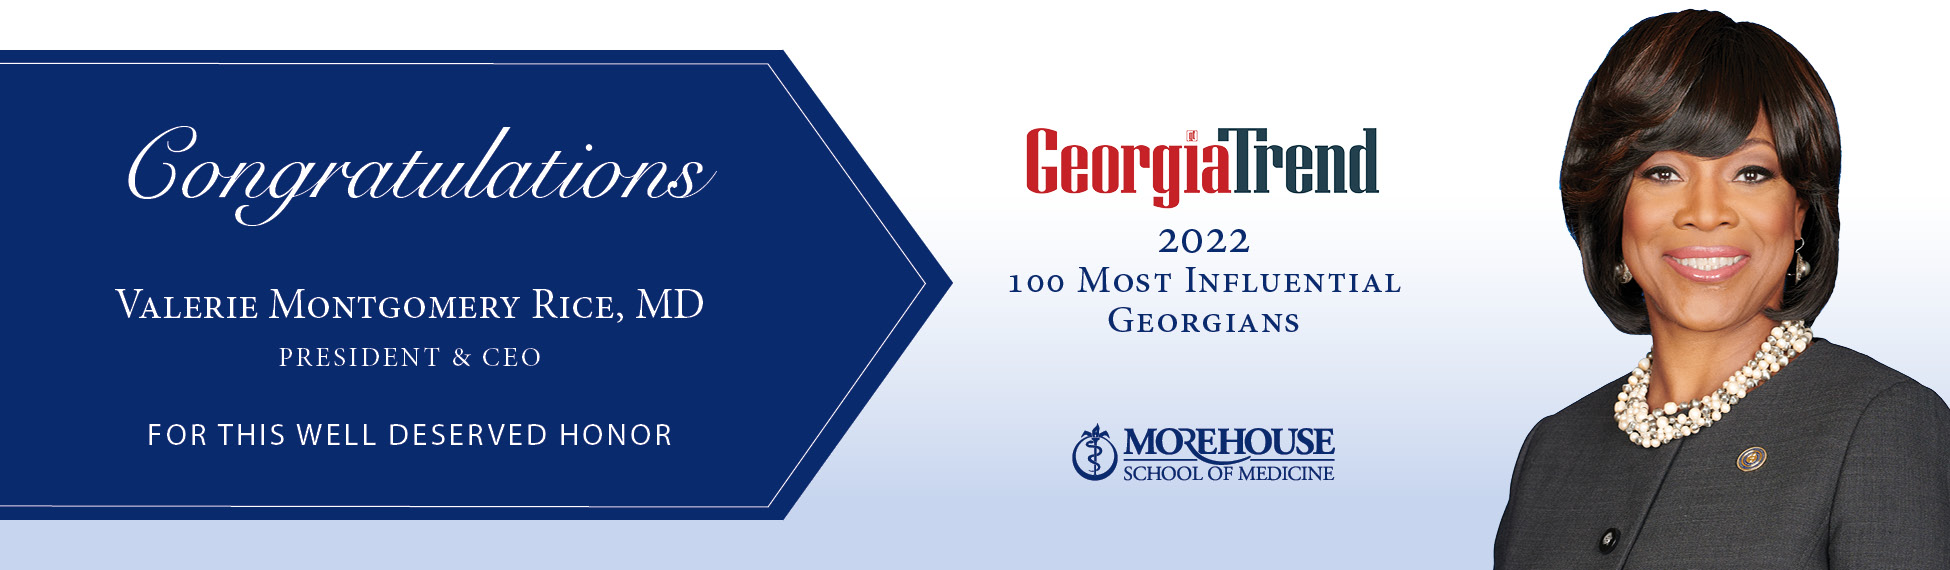 VMR named 2022 Georgia's Most Influential people